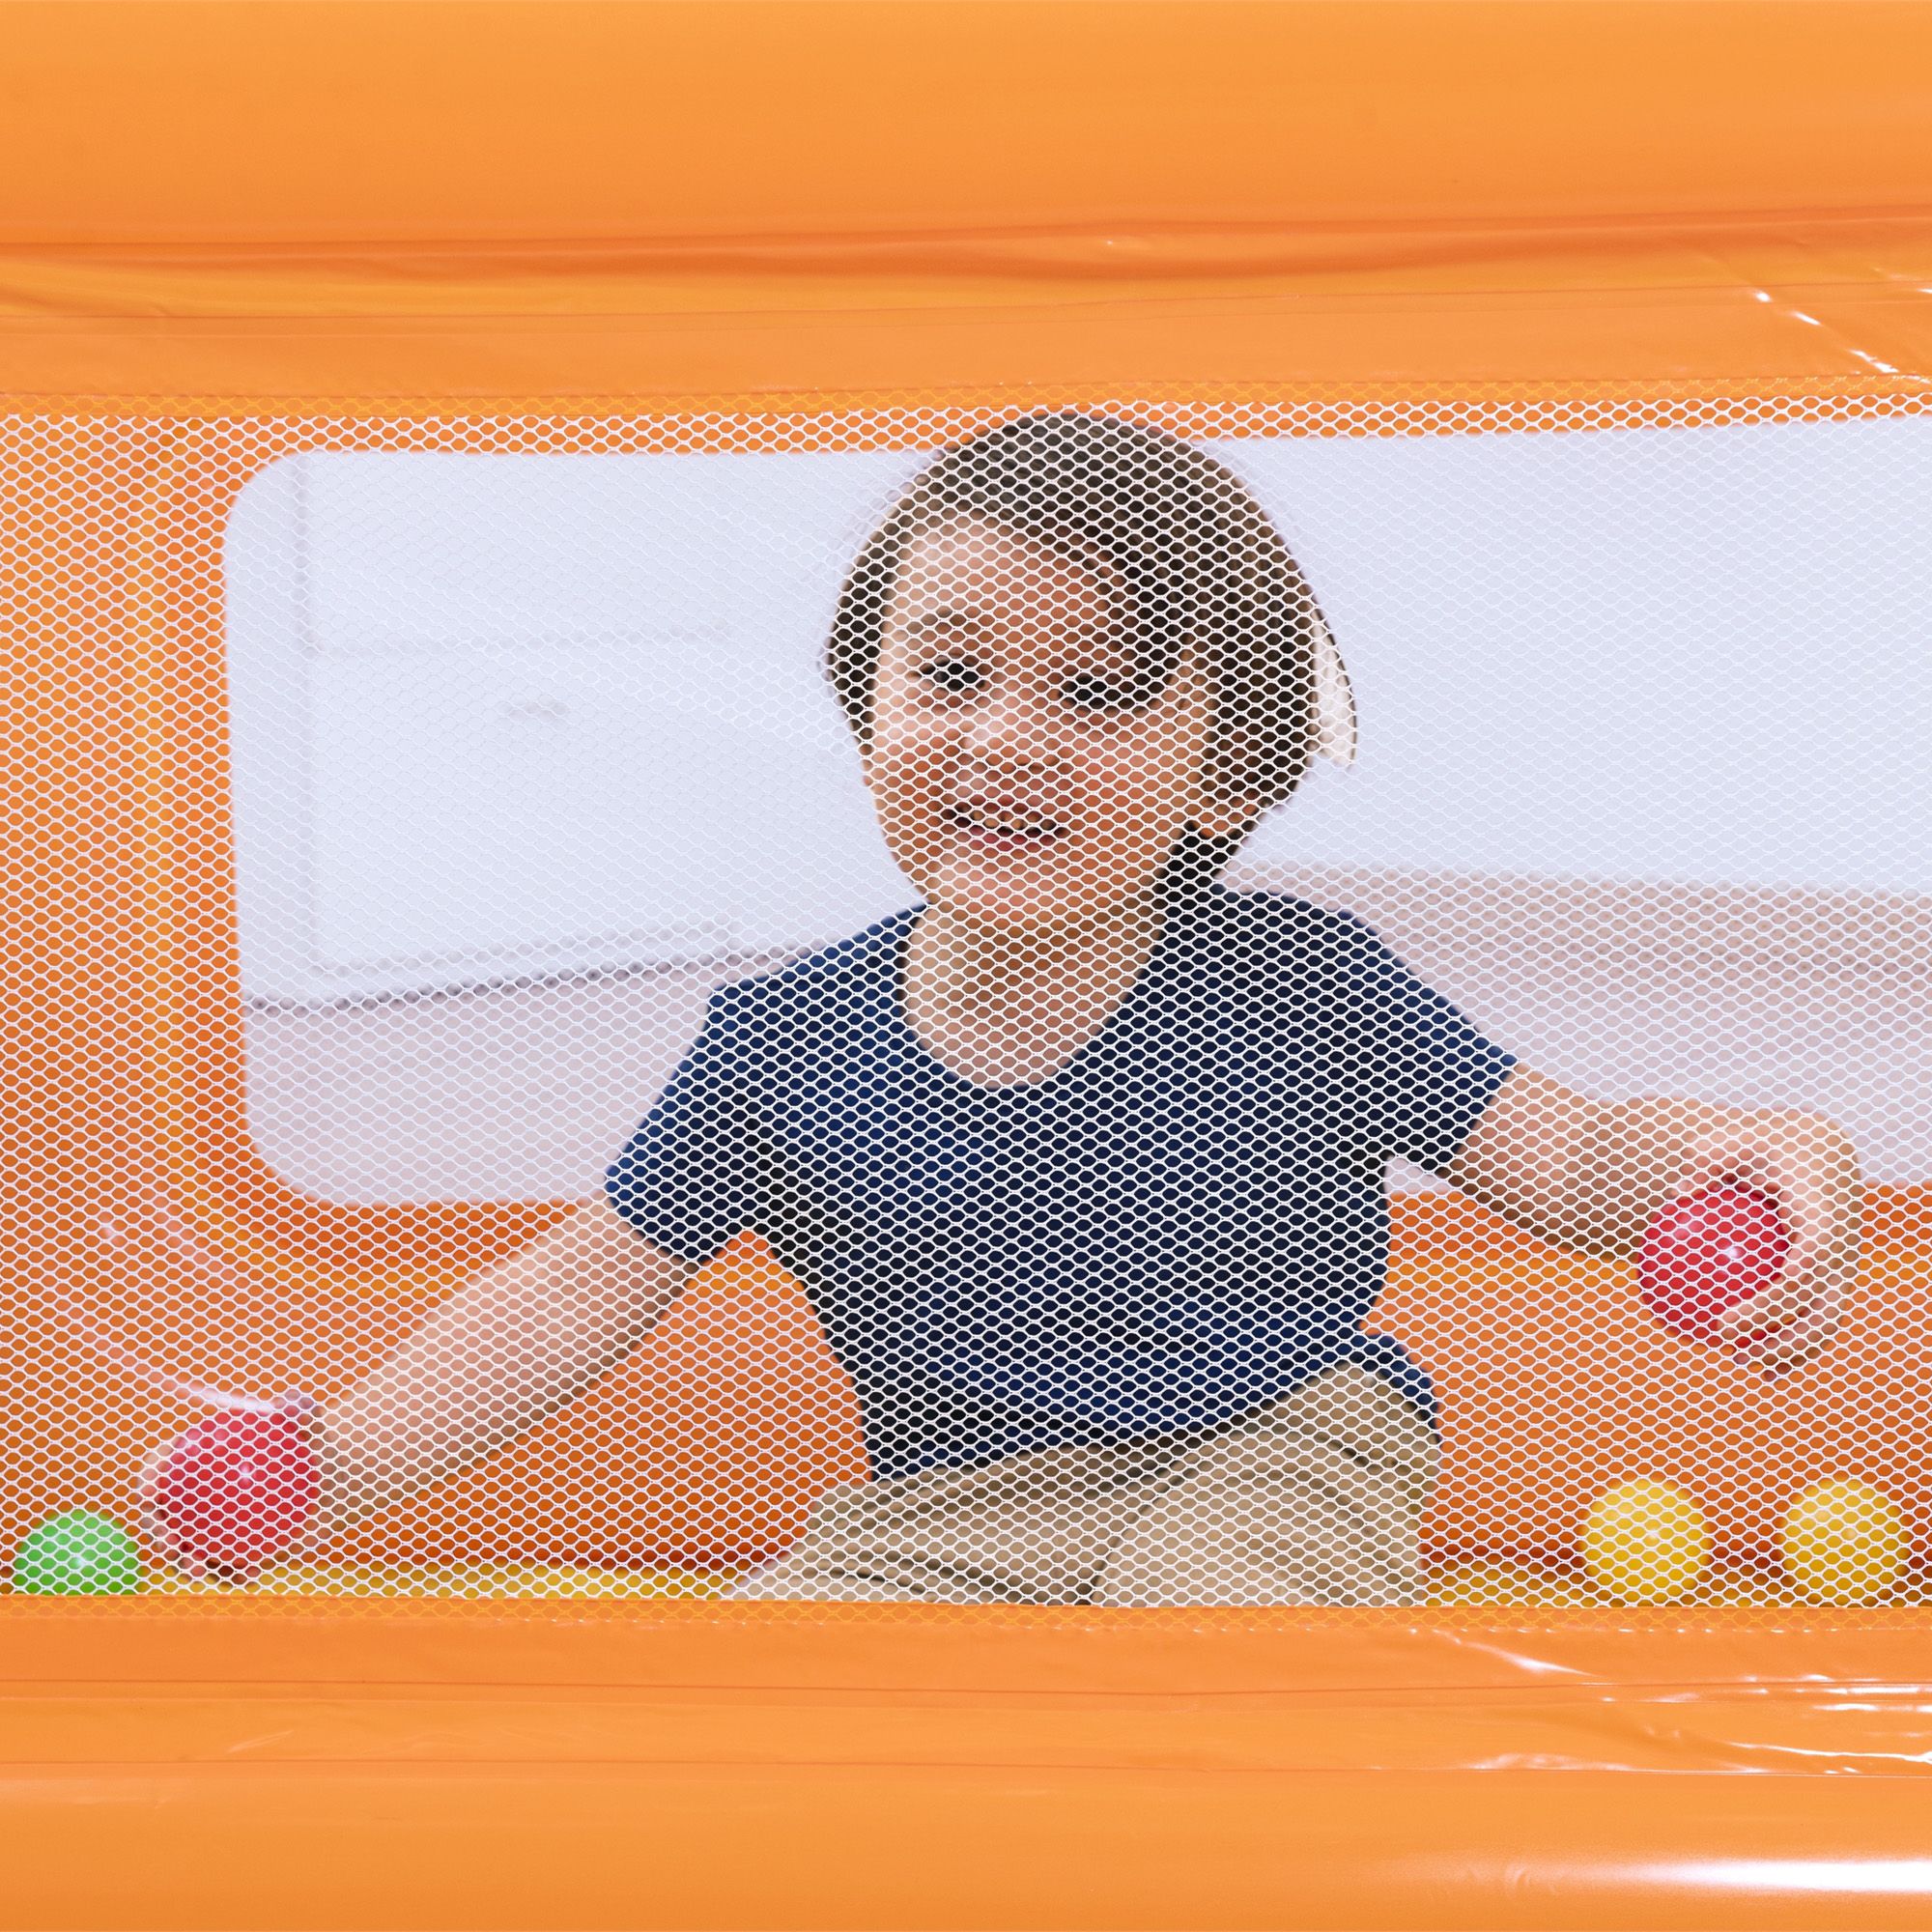 Bestway Multicolour Inflatable Outdoor Ball pit